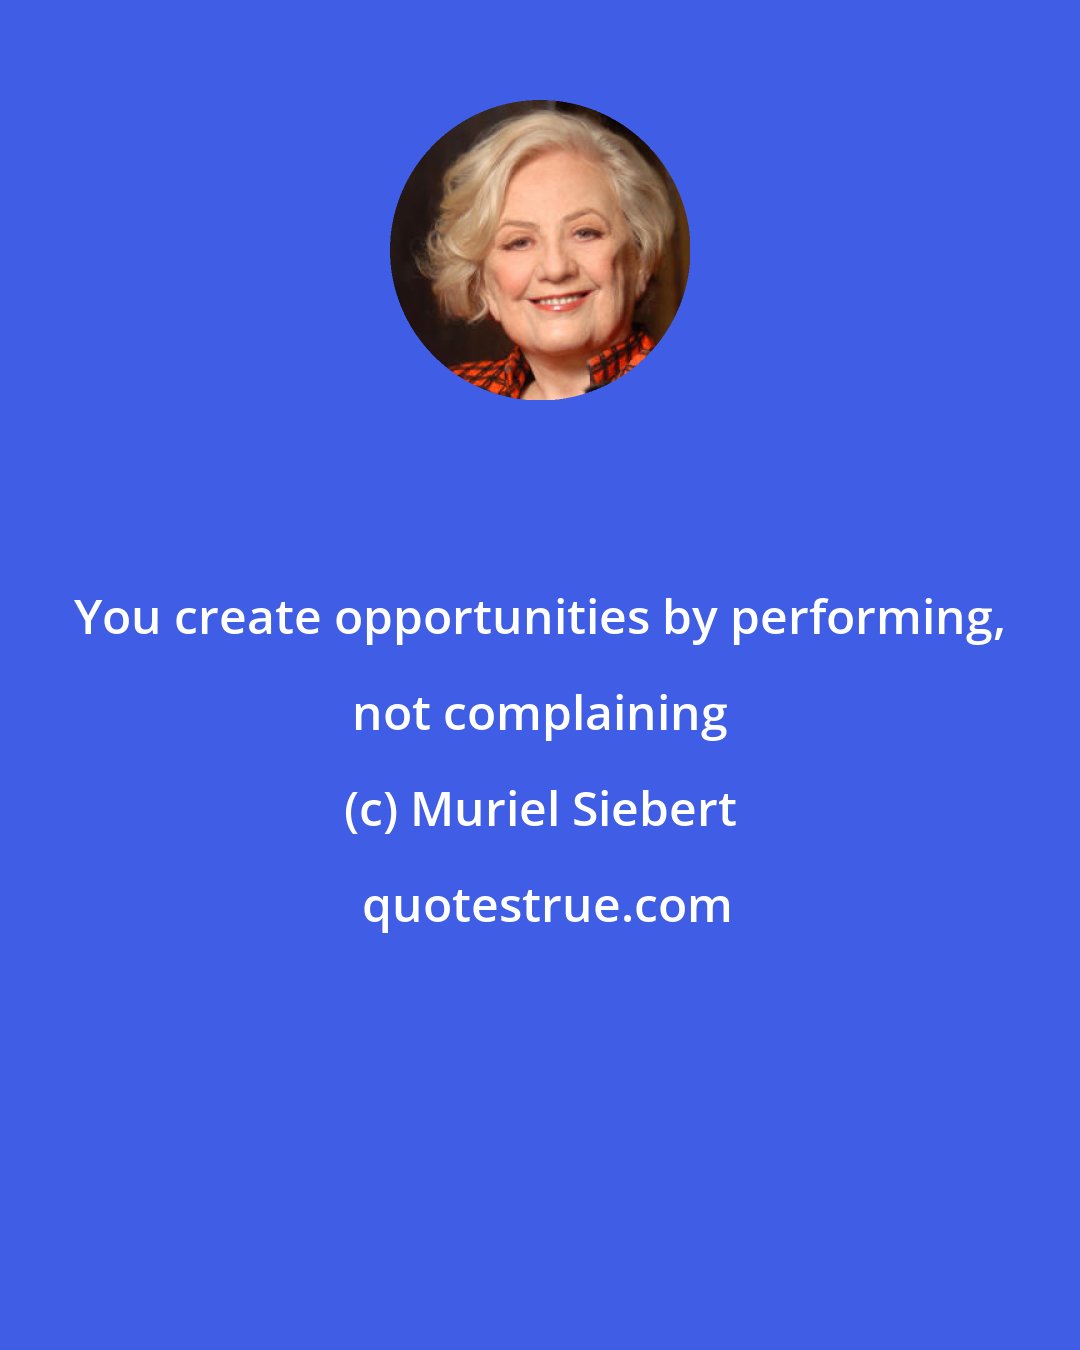 Muriel Siebert: You create opportunities by performing, not complaining